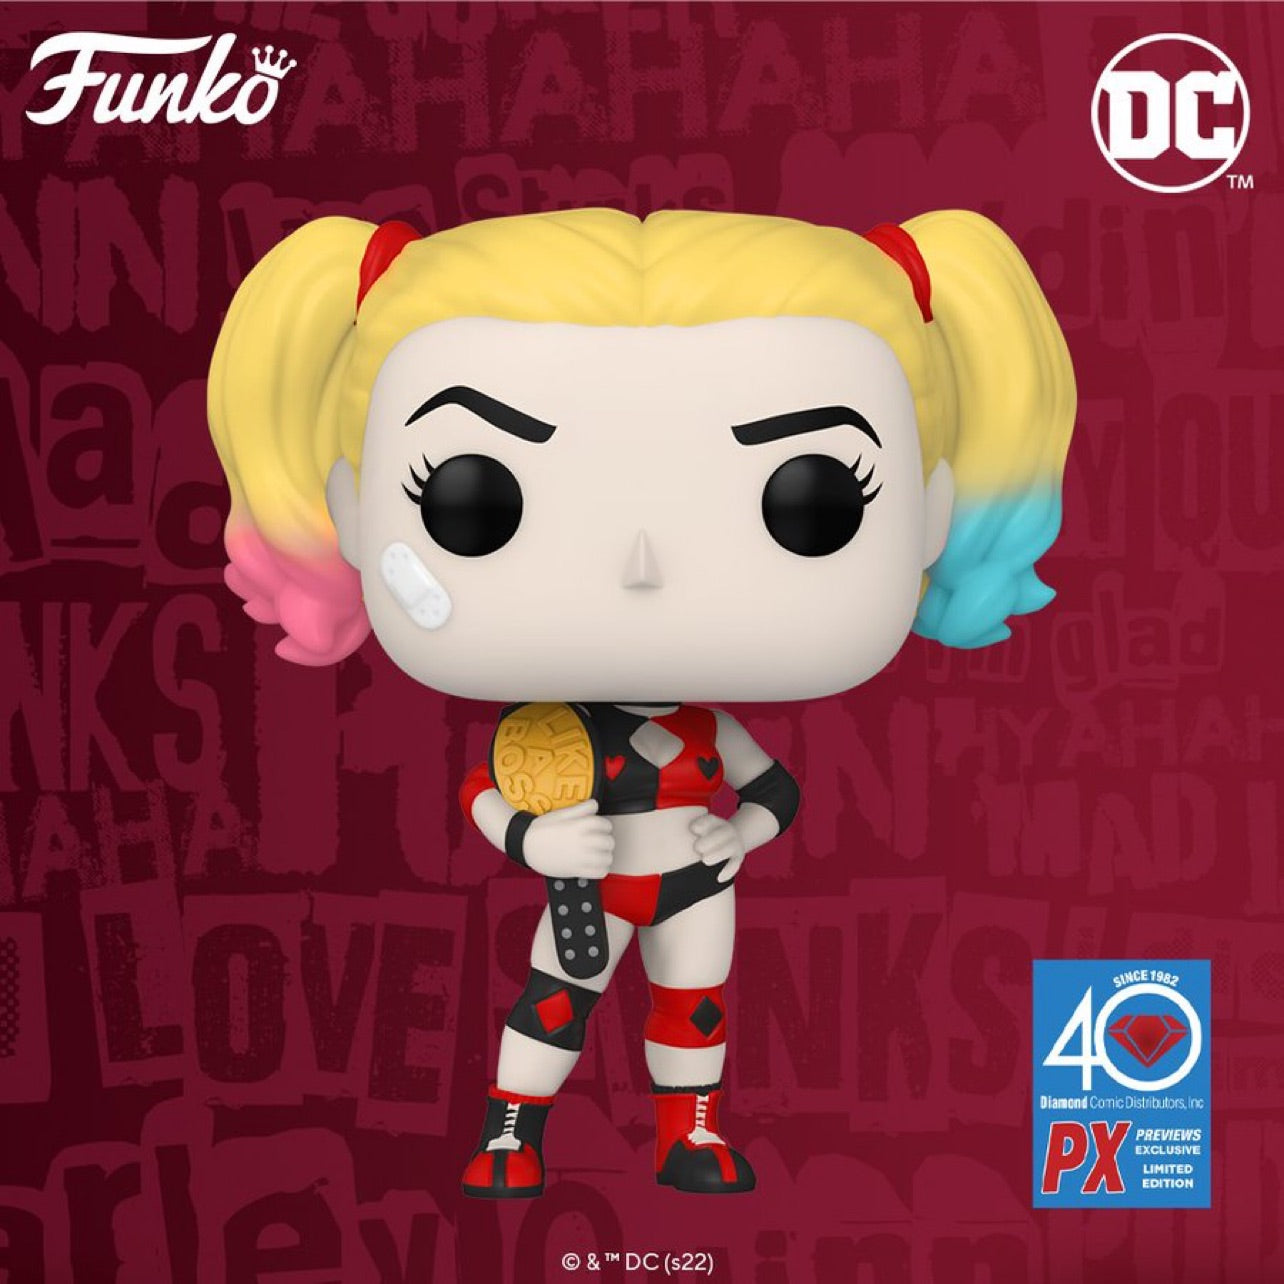 Funko Pop! Heroes: DC - Harley Quinn with Belt #436 - PX Exclusive (Pre-Order)